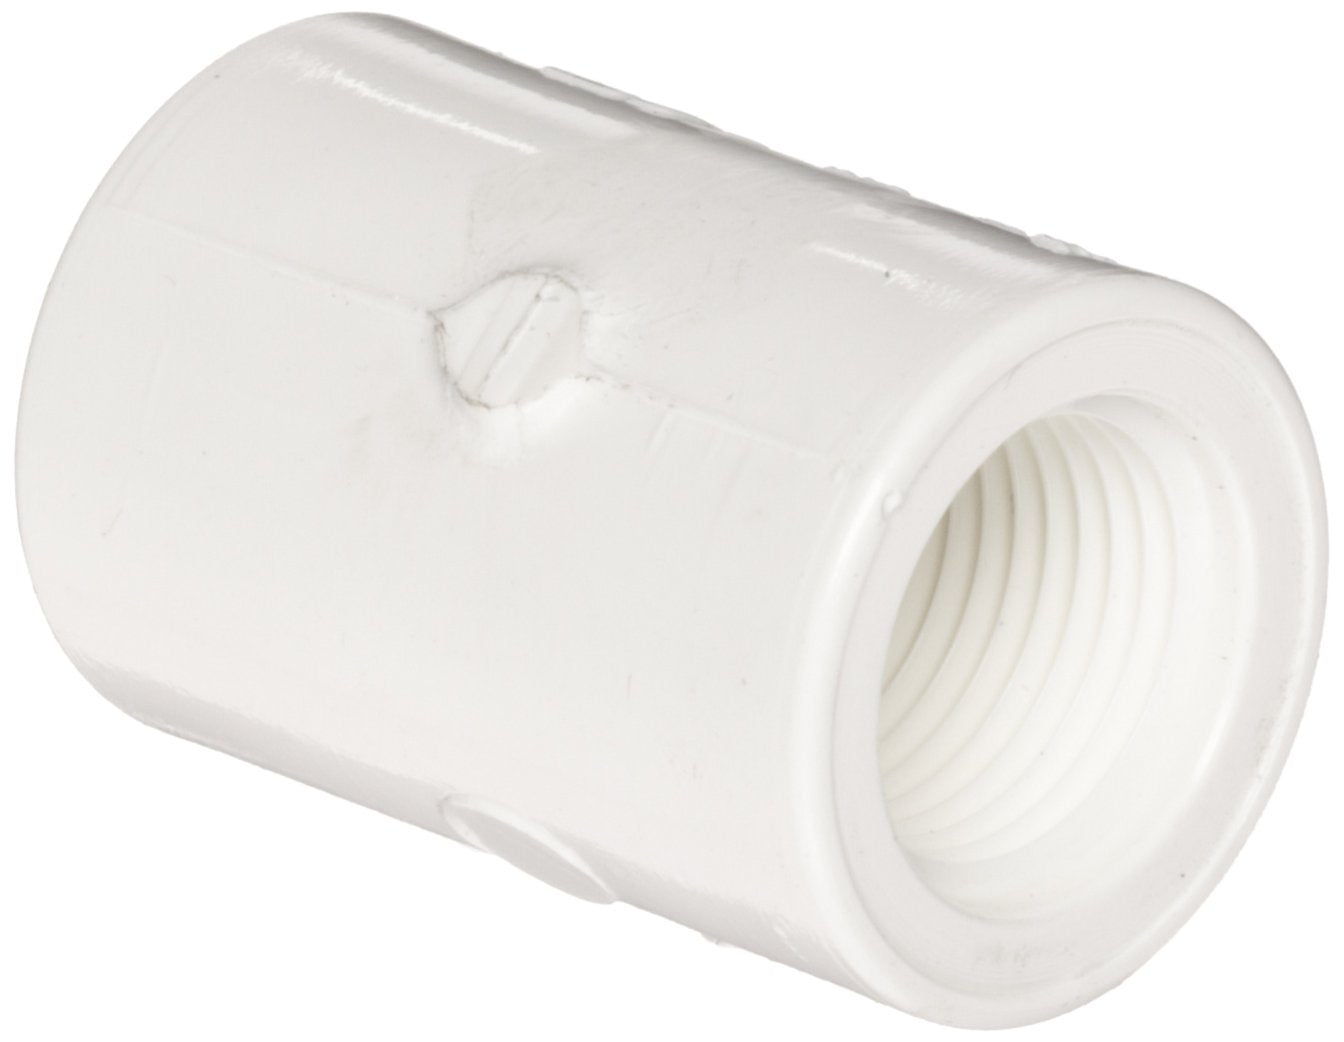 435-007 - 3/4" PVC Pipe Fitting, Adapter, Schedule 40, White, Socket x NPT Female